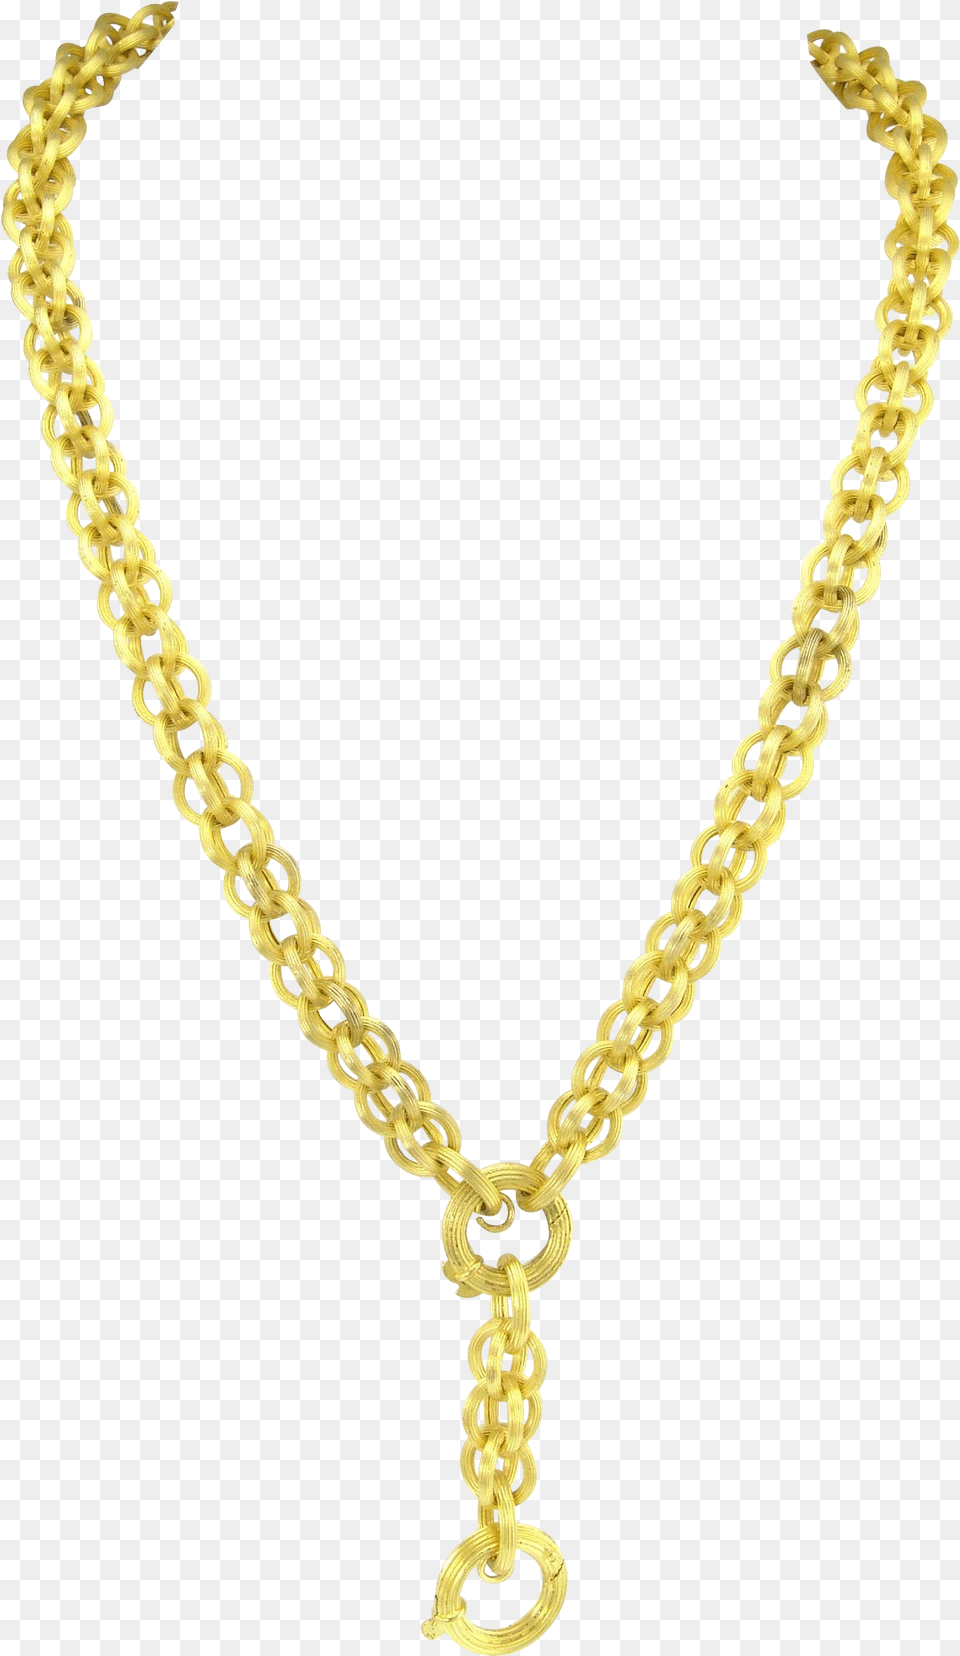 Jewelry Clipart Gold Chain Picsart Gold Chain, Accessories, Necklace Free Transparent Png